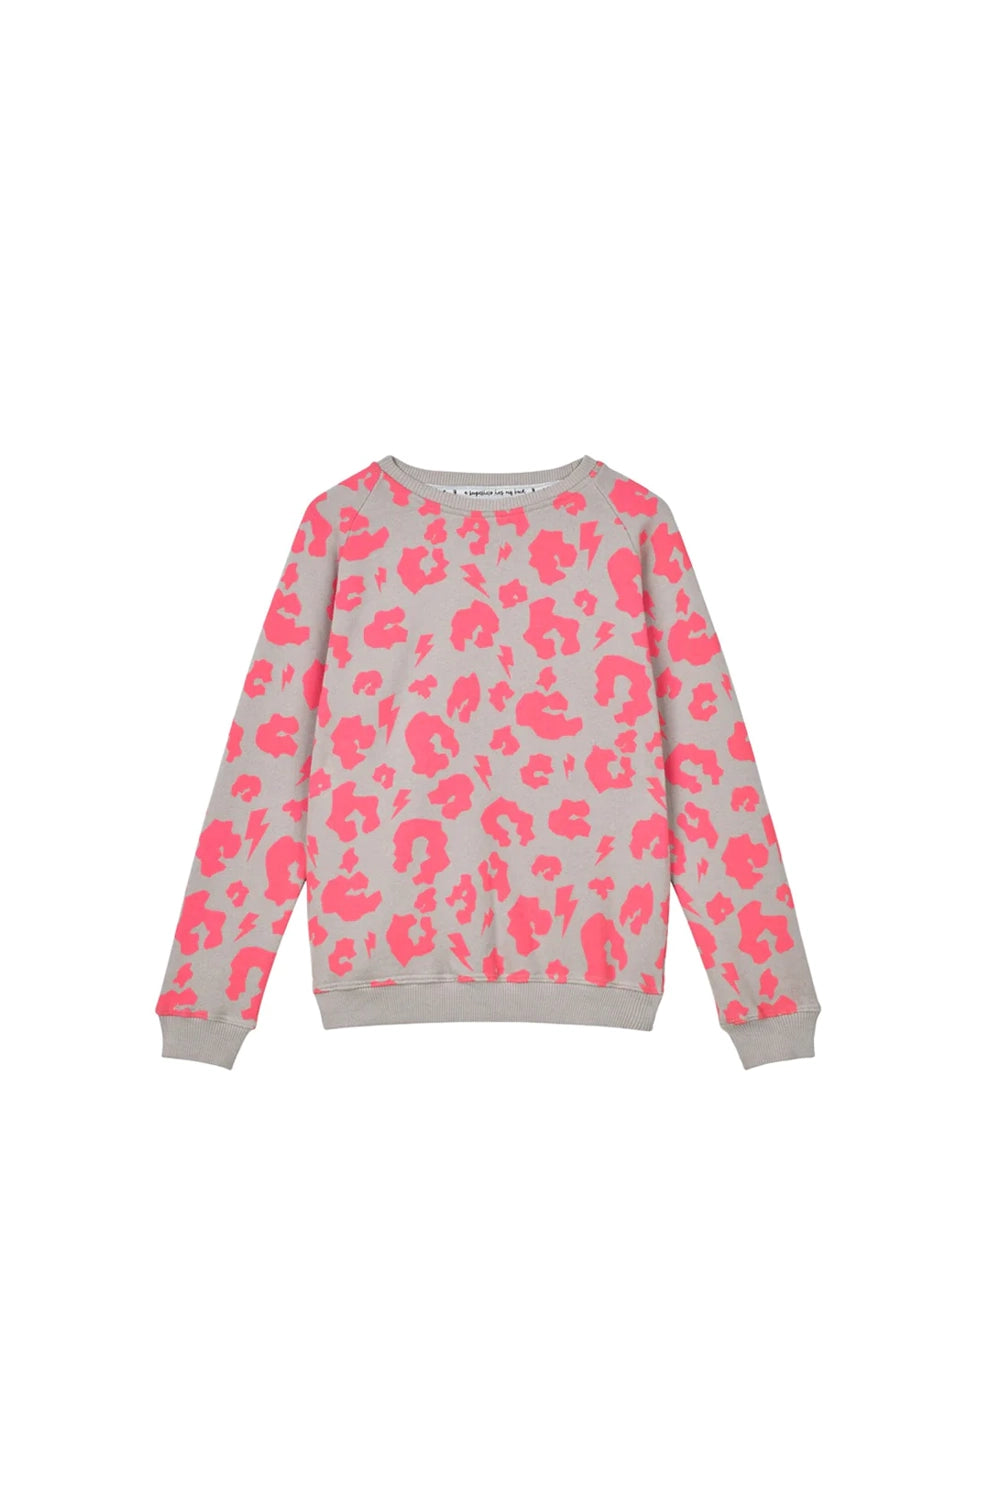 Super Soft Sweatshirt - Grey with Neon Coral Leopard Print and ...